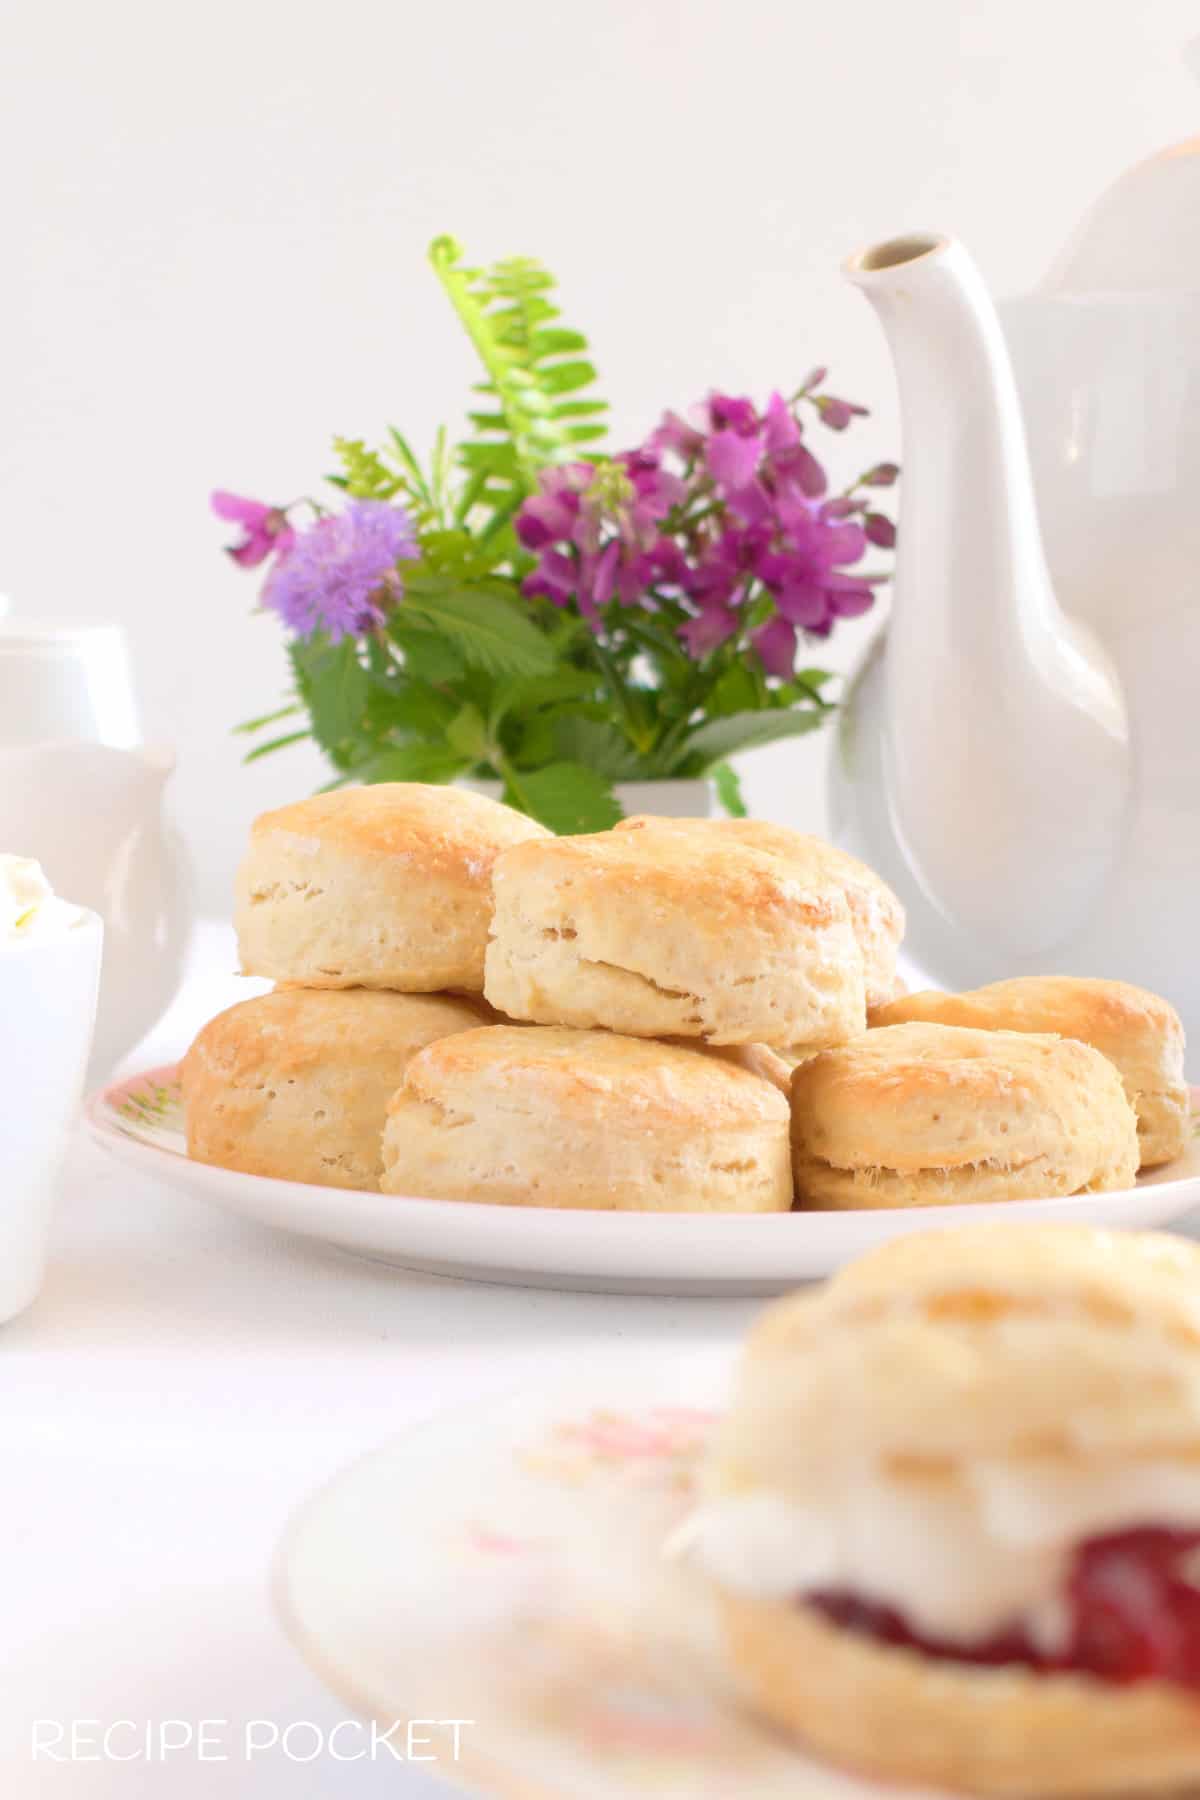 Scones and a table set for afternoon tea.